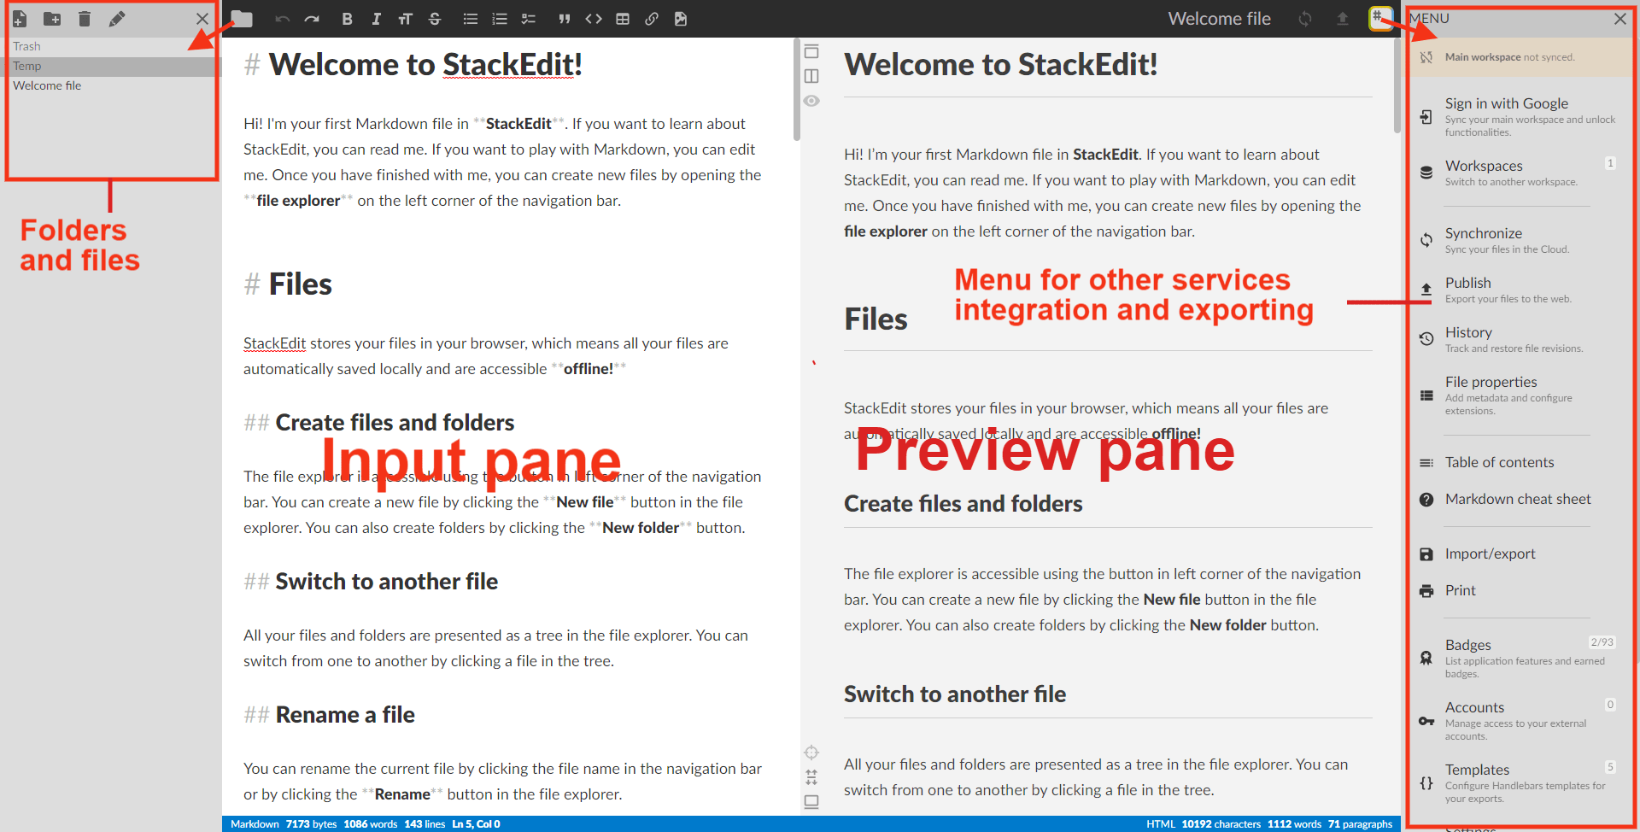 Overview of each part of StackEdit